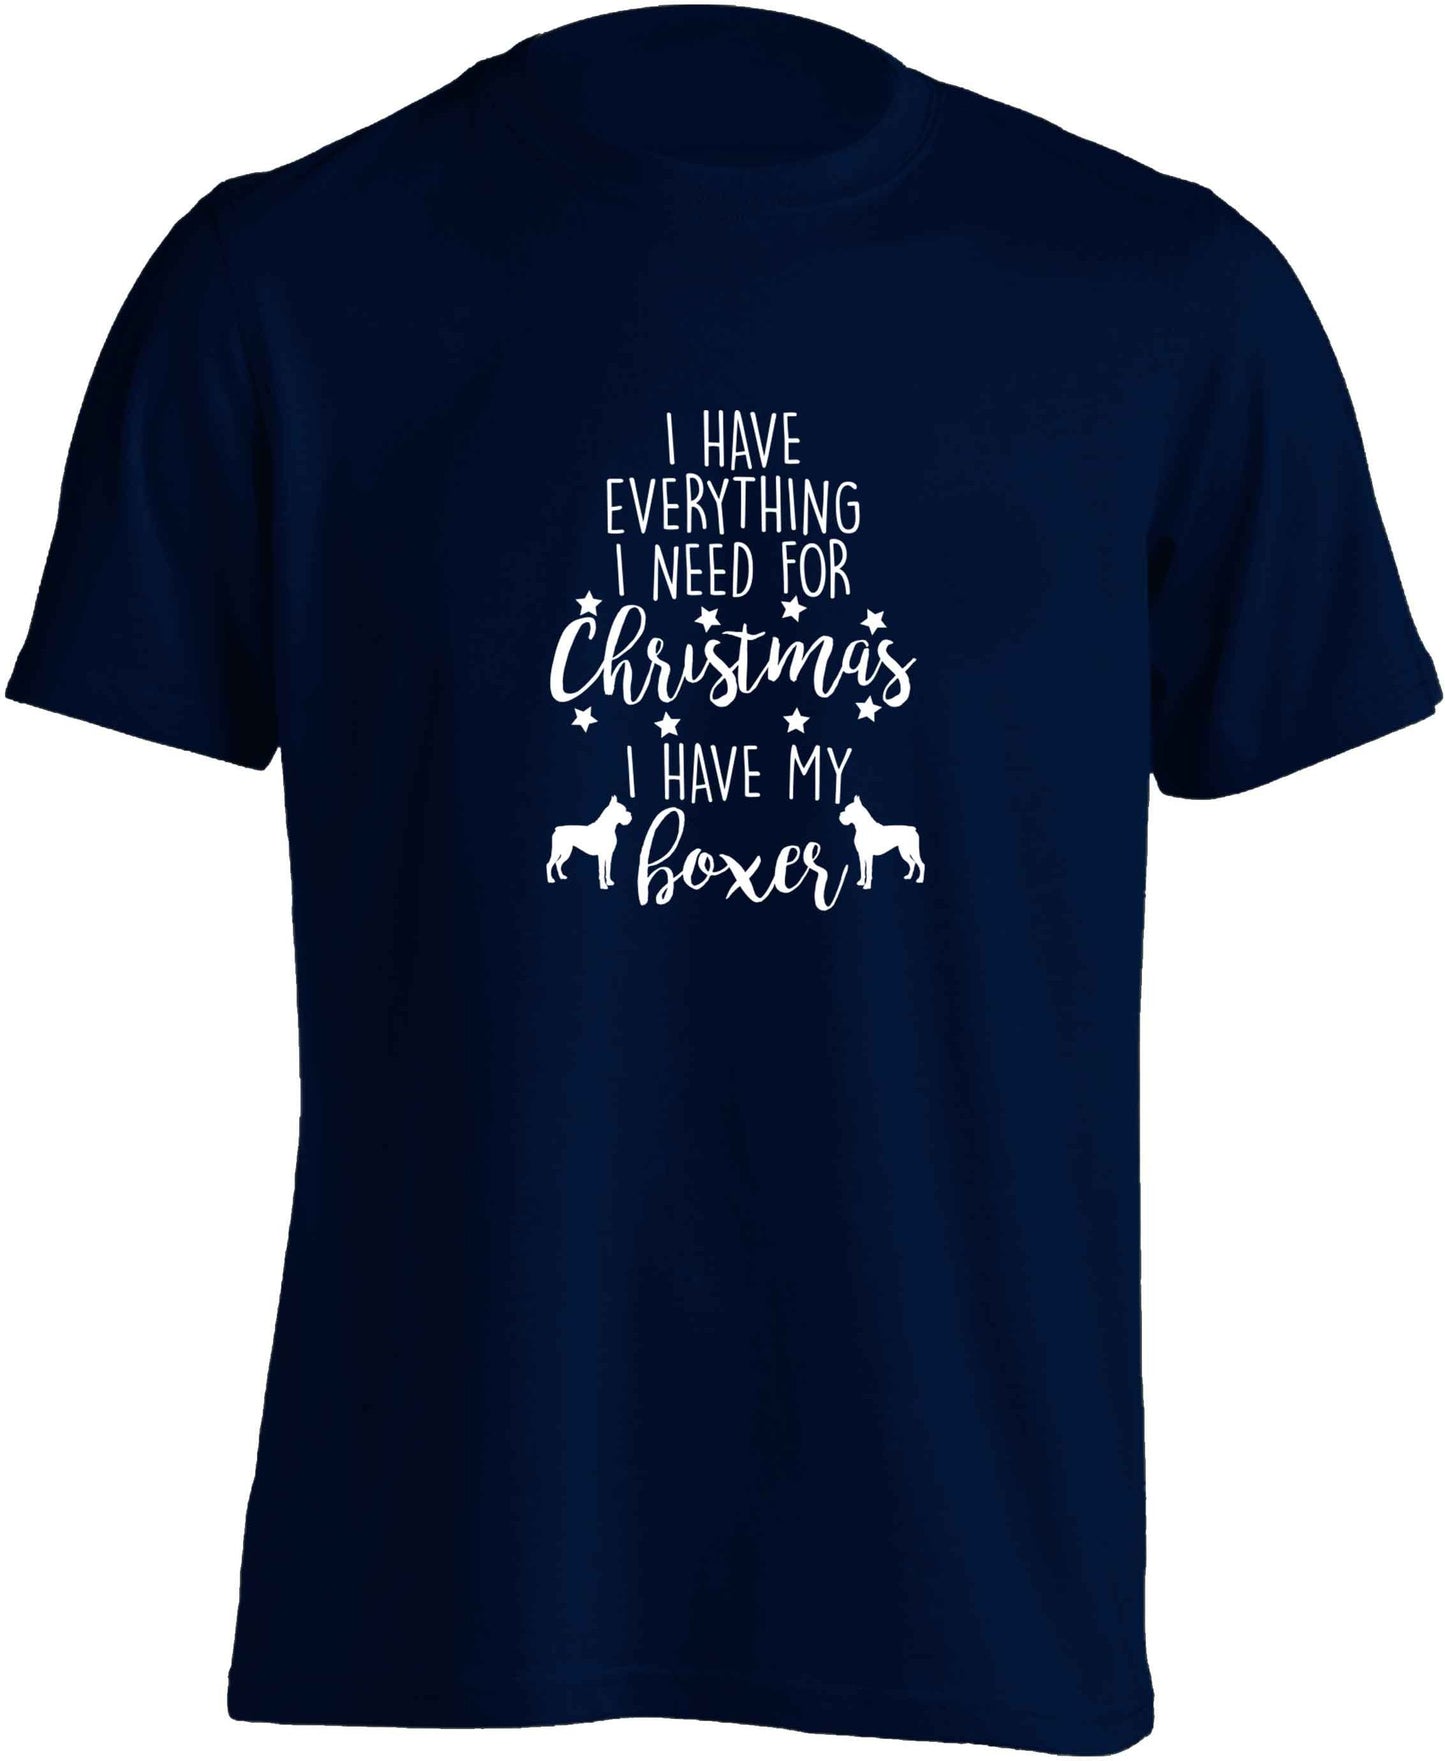 I have everything I need for Christmas I have my boxer adults unisex navy Tshirt 2XL